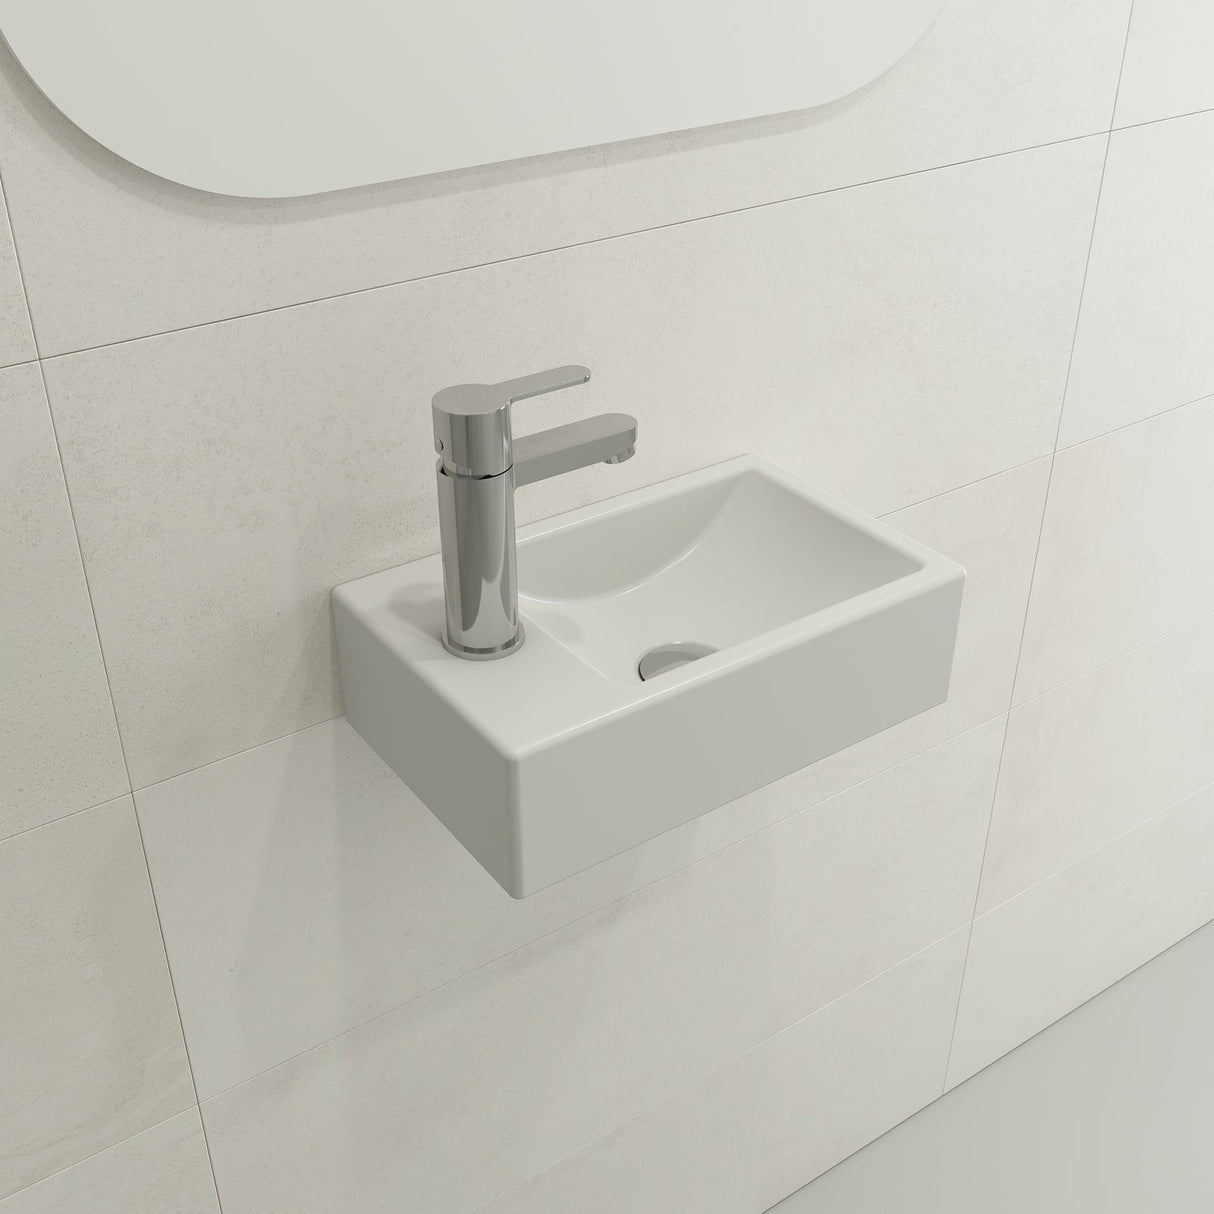 BOCCHI 1418-002-0126 Milano Wall-Mounted Sink Fireclay 14.5 in. 1-hole Left Side Faucet Deck in Matte White